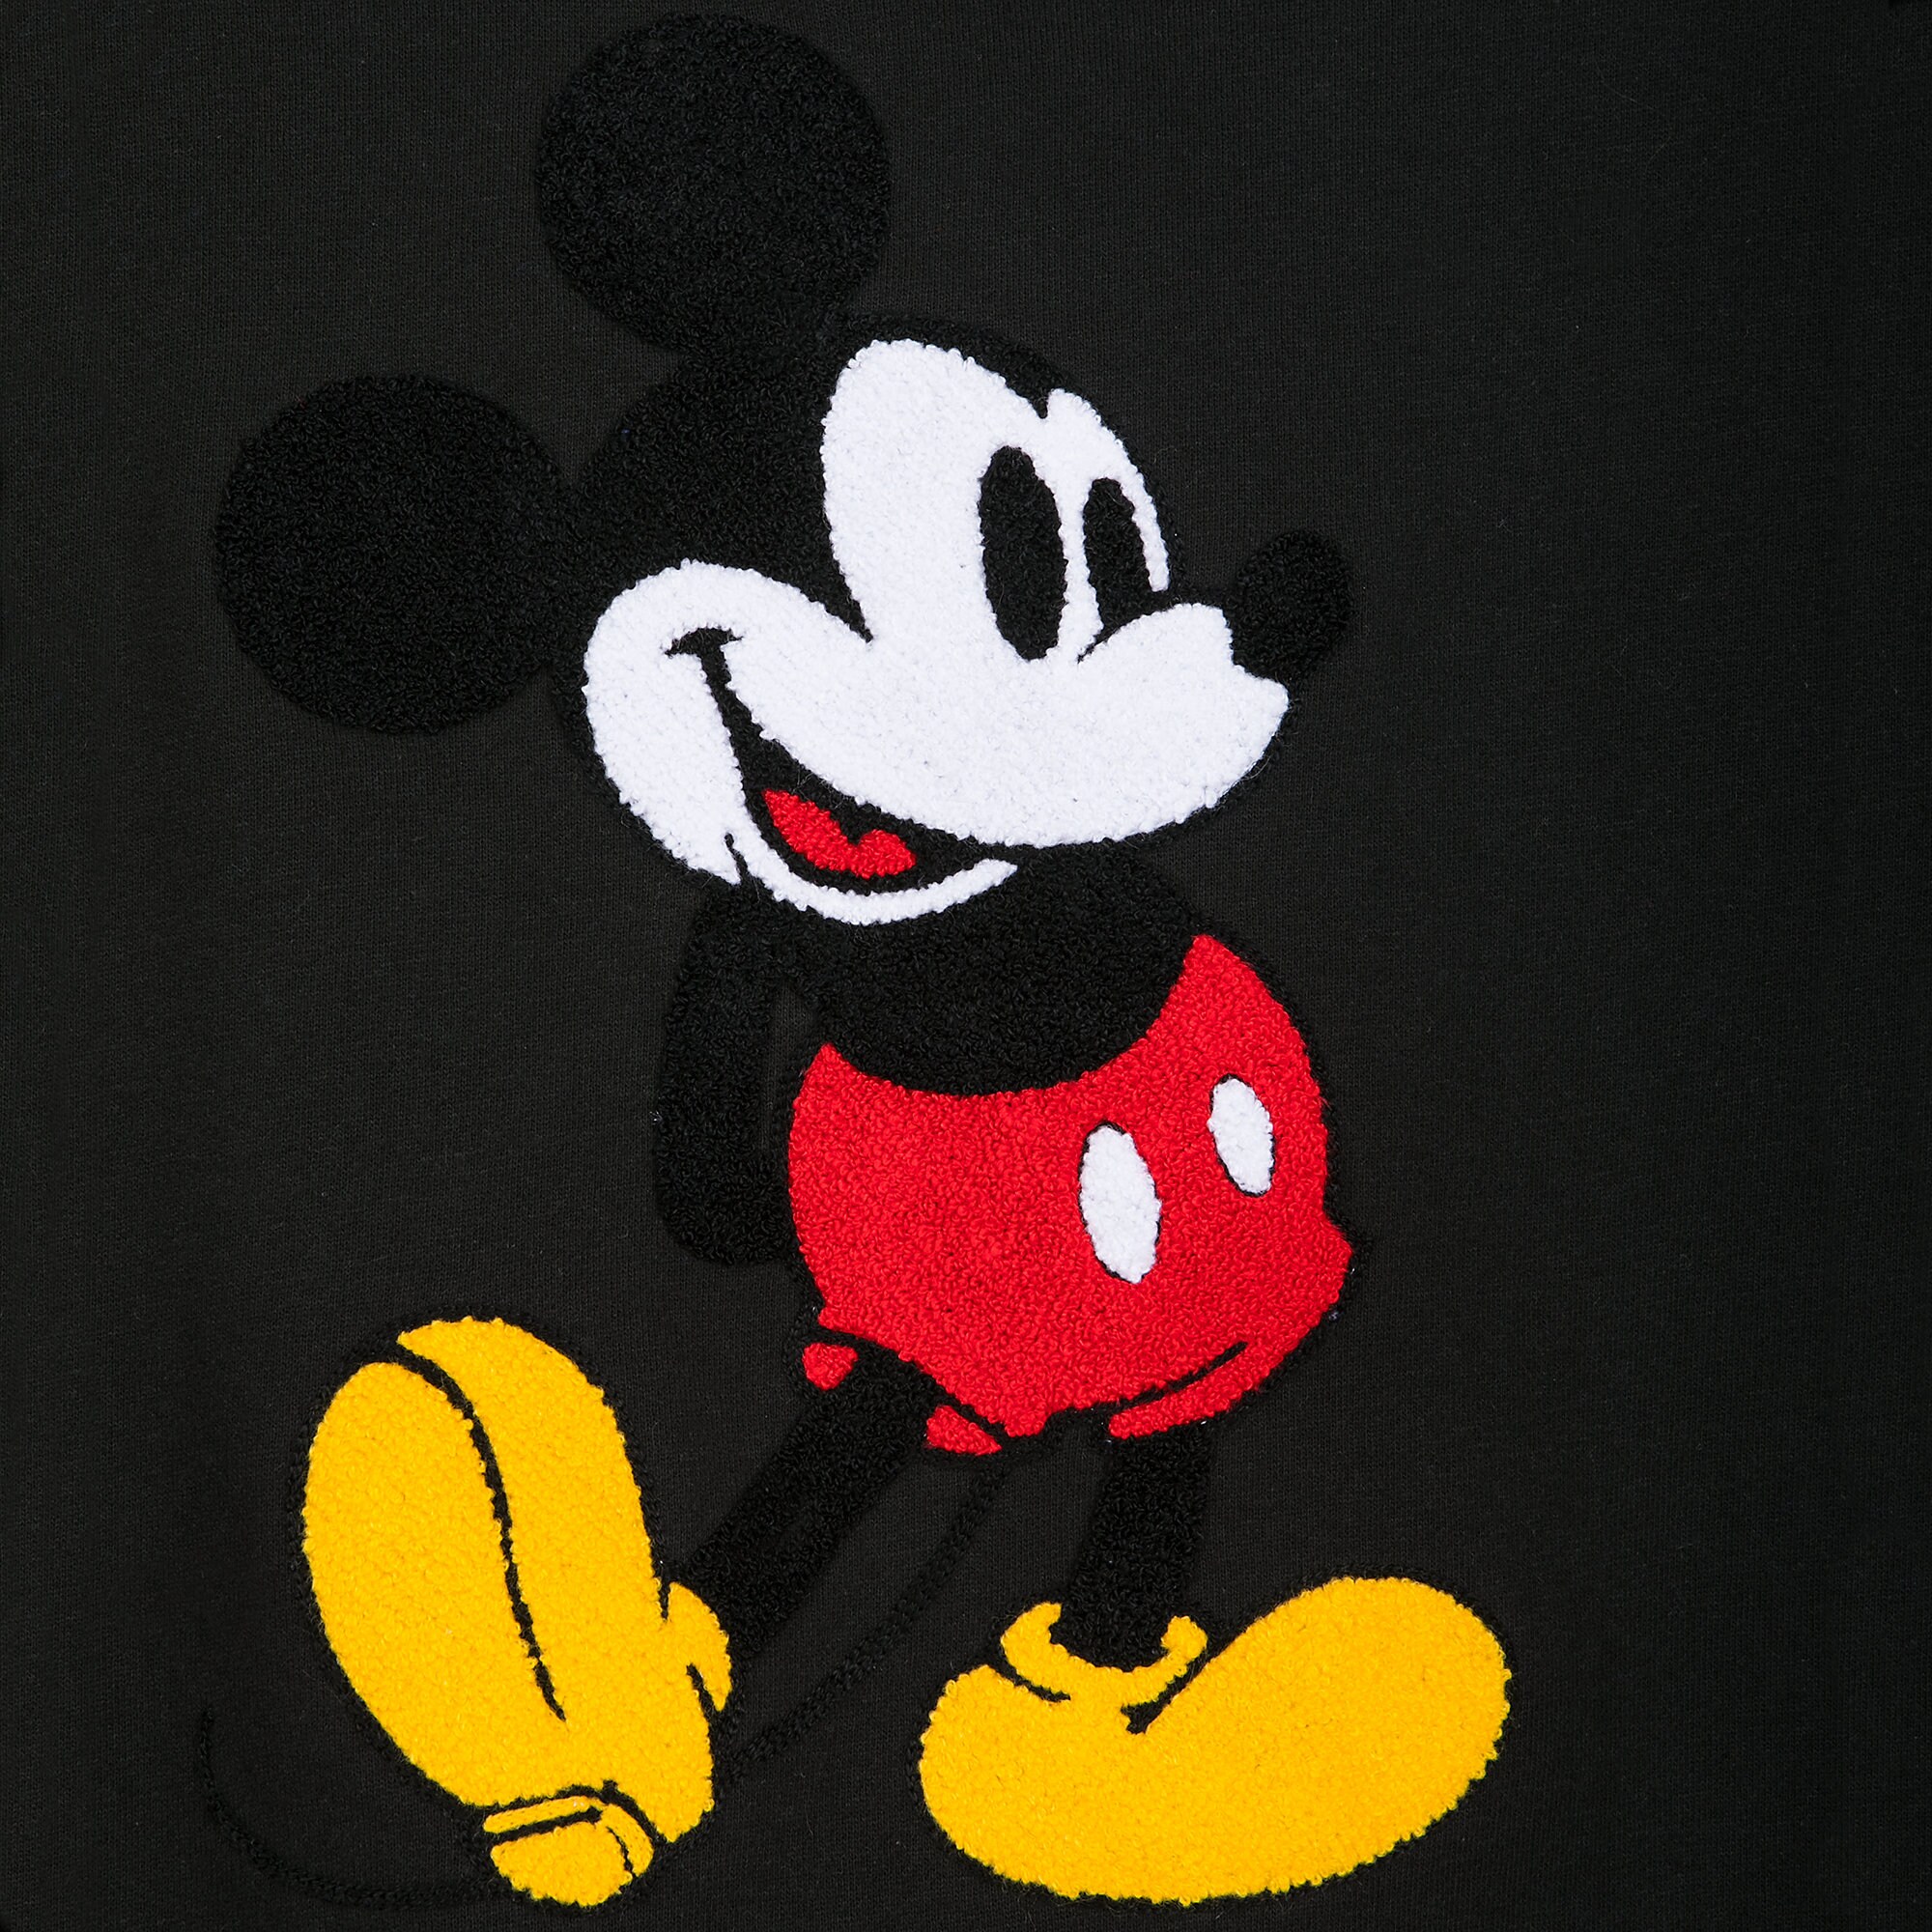 Mickey Mouse Pullover Sweatshirt for Men - Chicago